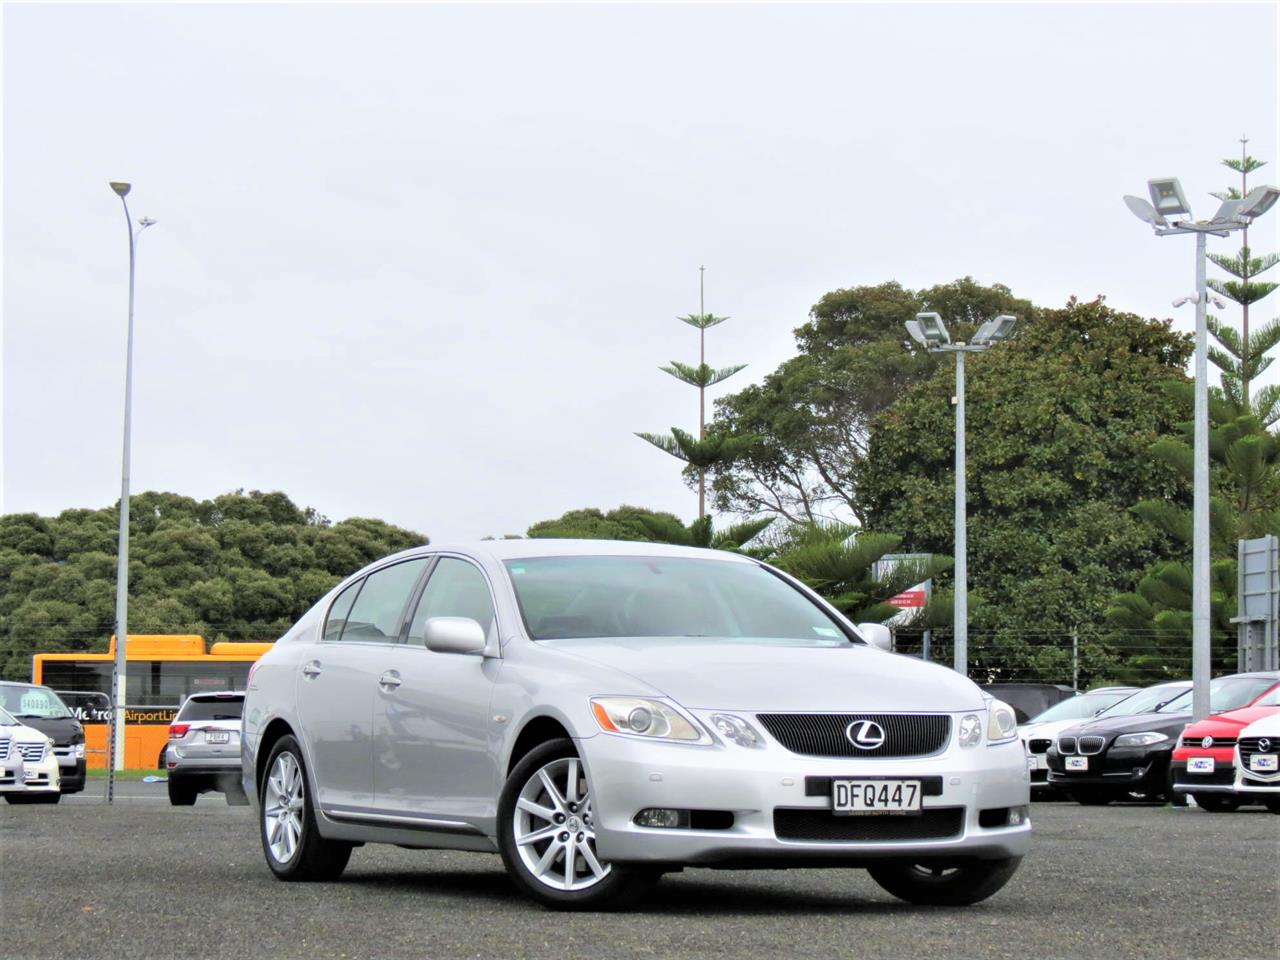 NZC 2006 Lexus GS 300 just arrived to Auckland